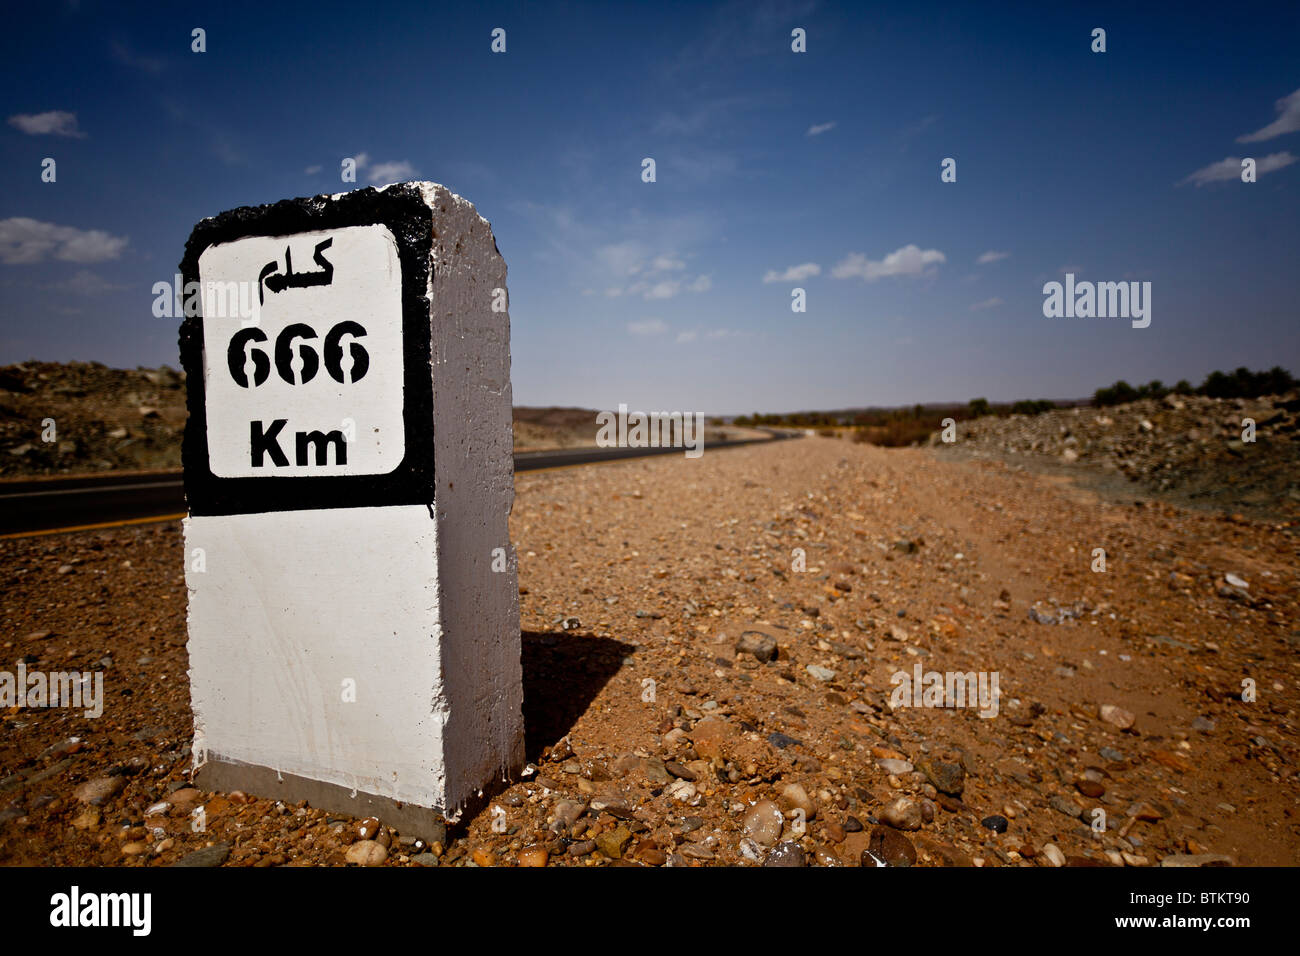 A 666km sign on the side of the road Stock Photo